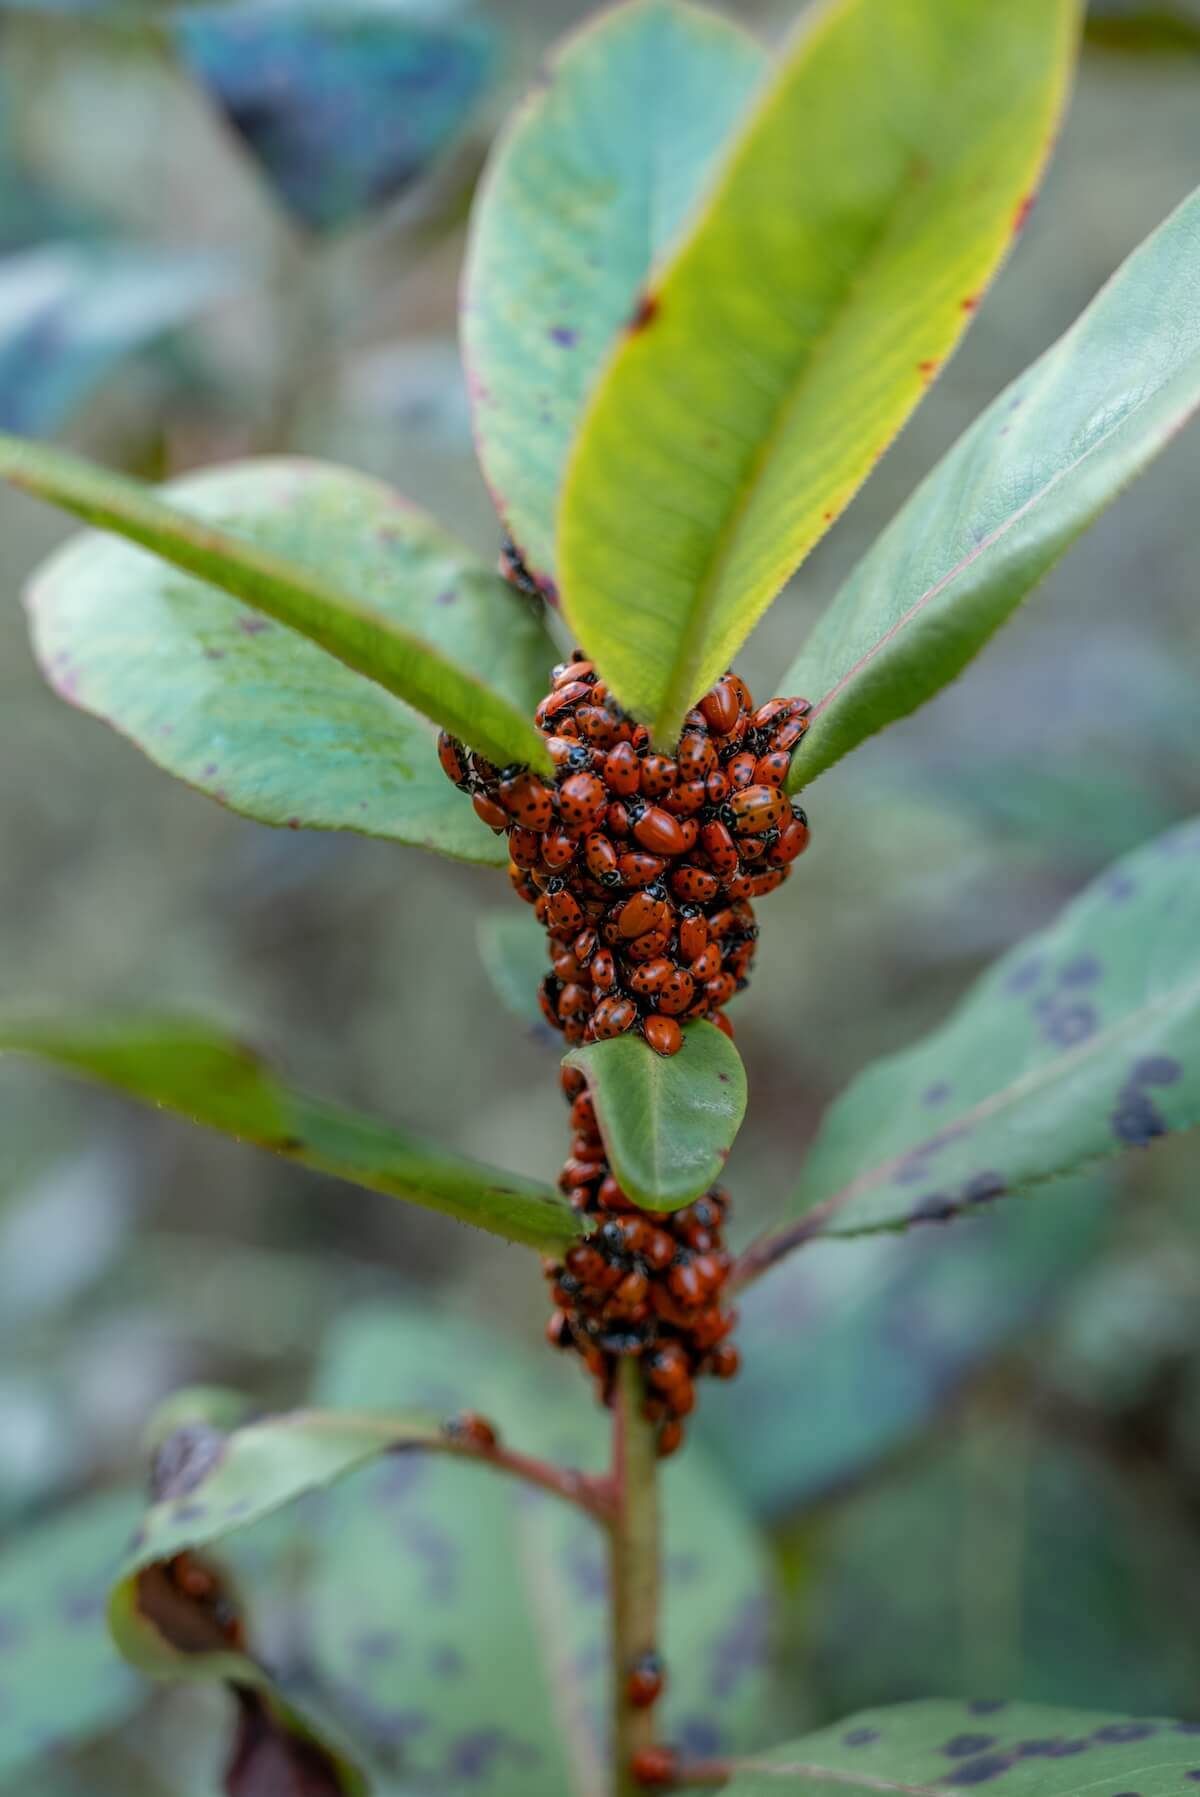 A close-up of a cluster of ladybugs swarming the stem of a leafy, green plant.